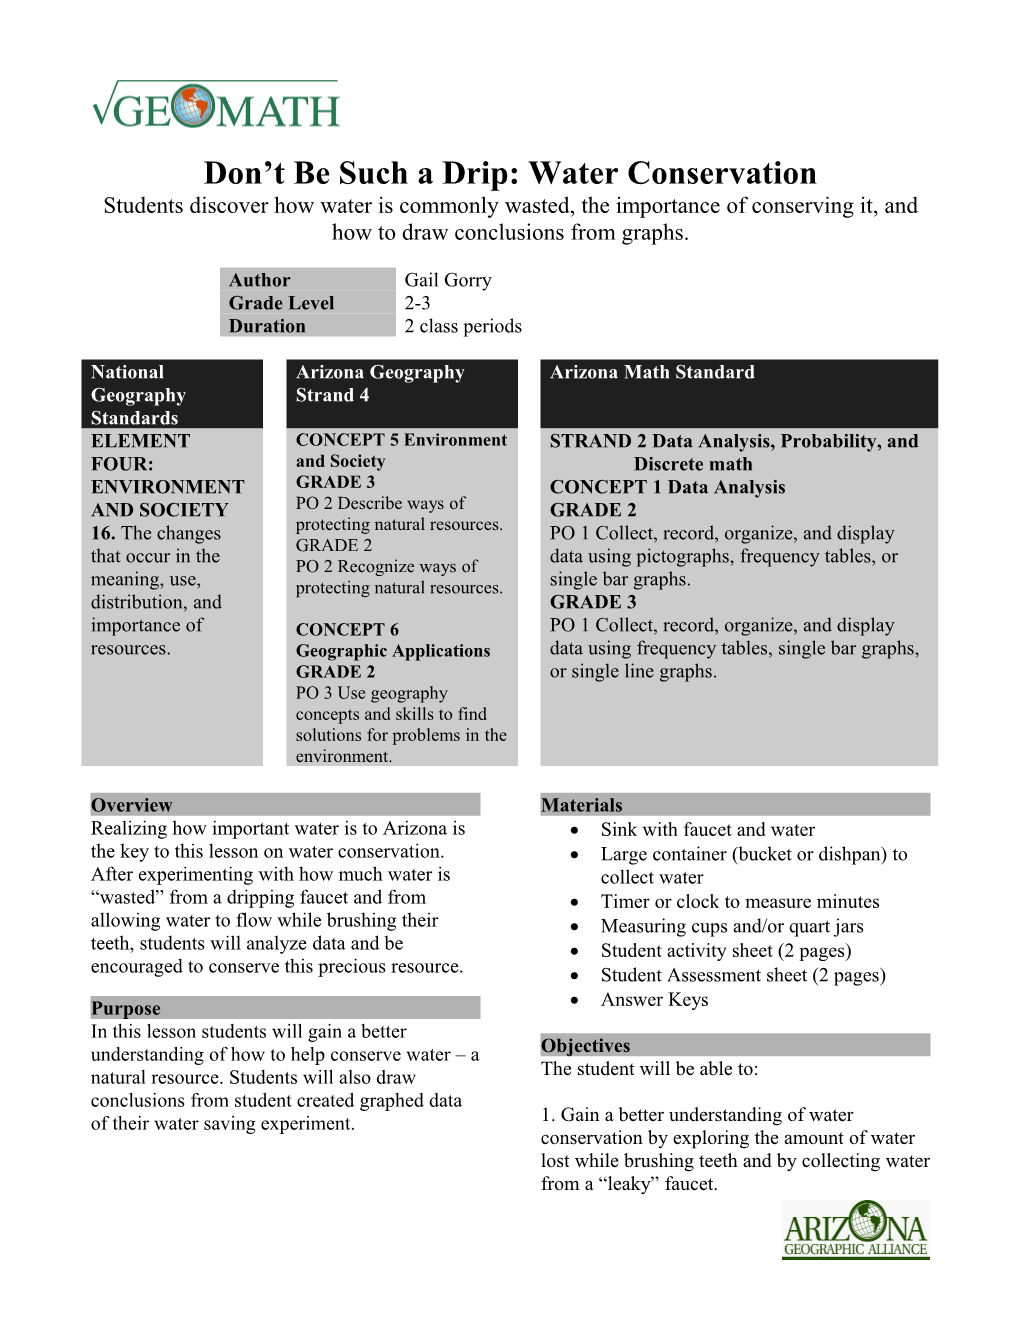 Don T Be Such a Drip: Water Conservation